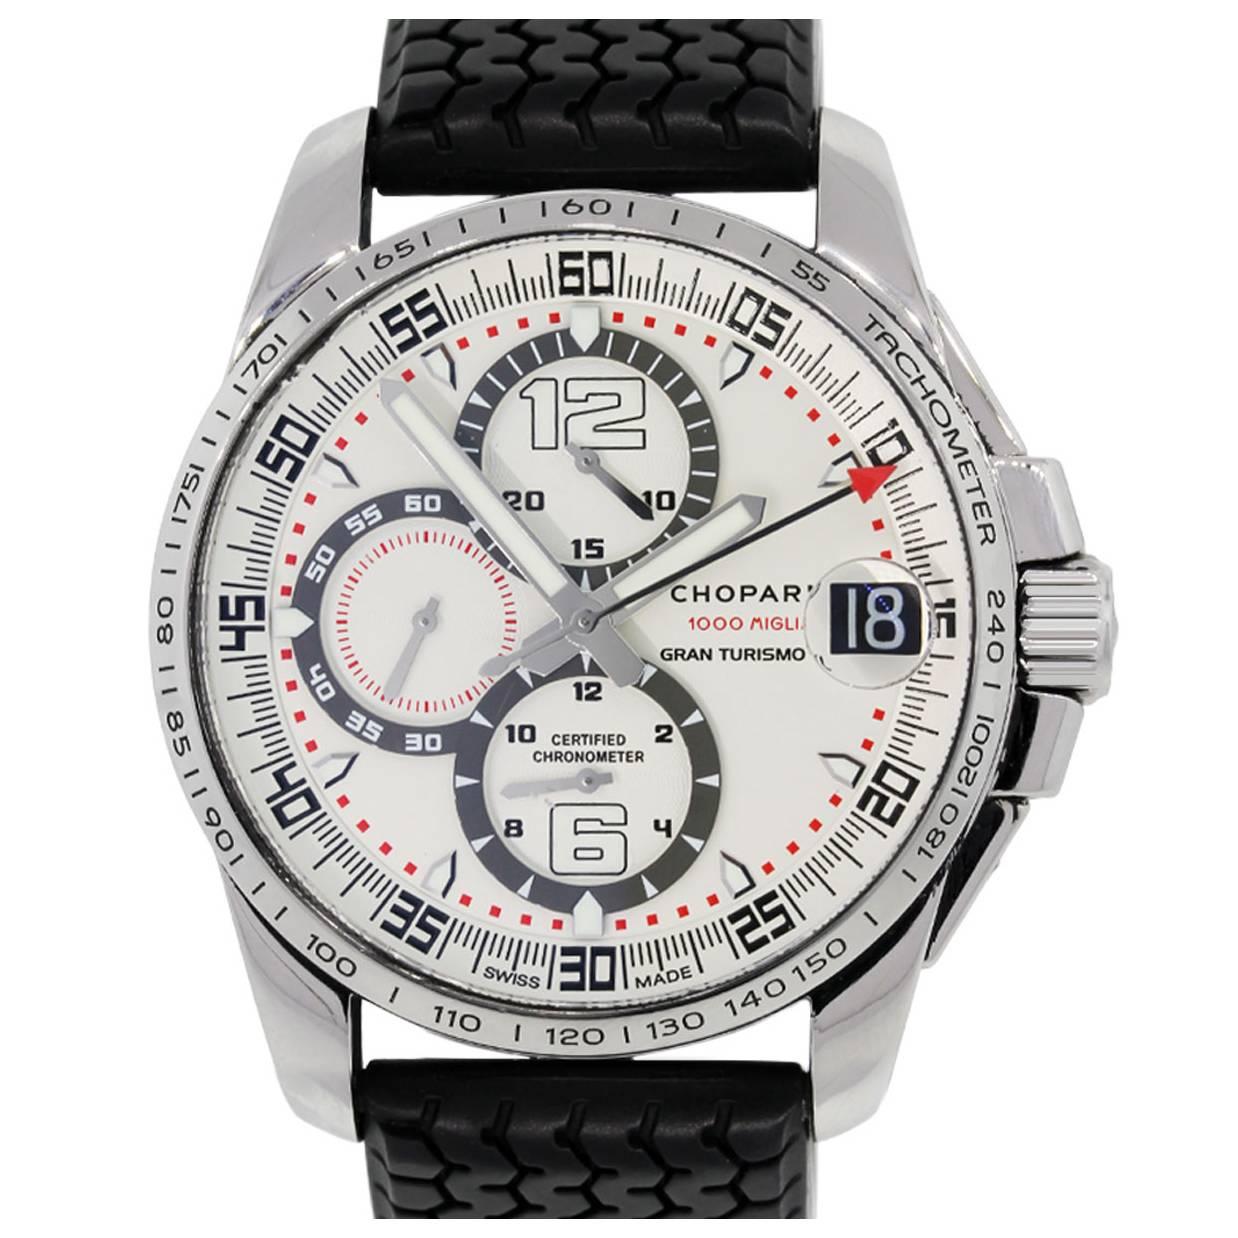 Chopard Stainless Steel Gran Turismo White Chronograph Dial Automatic Wristwatch